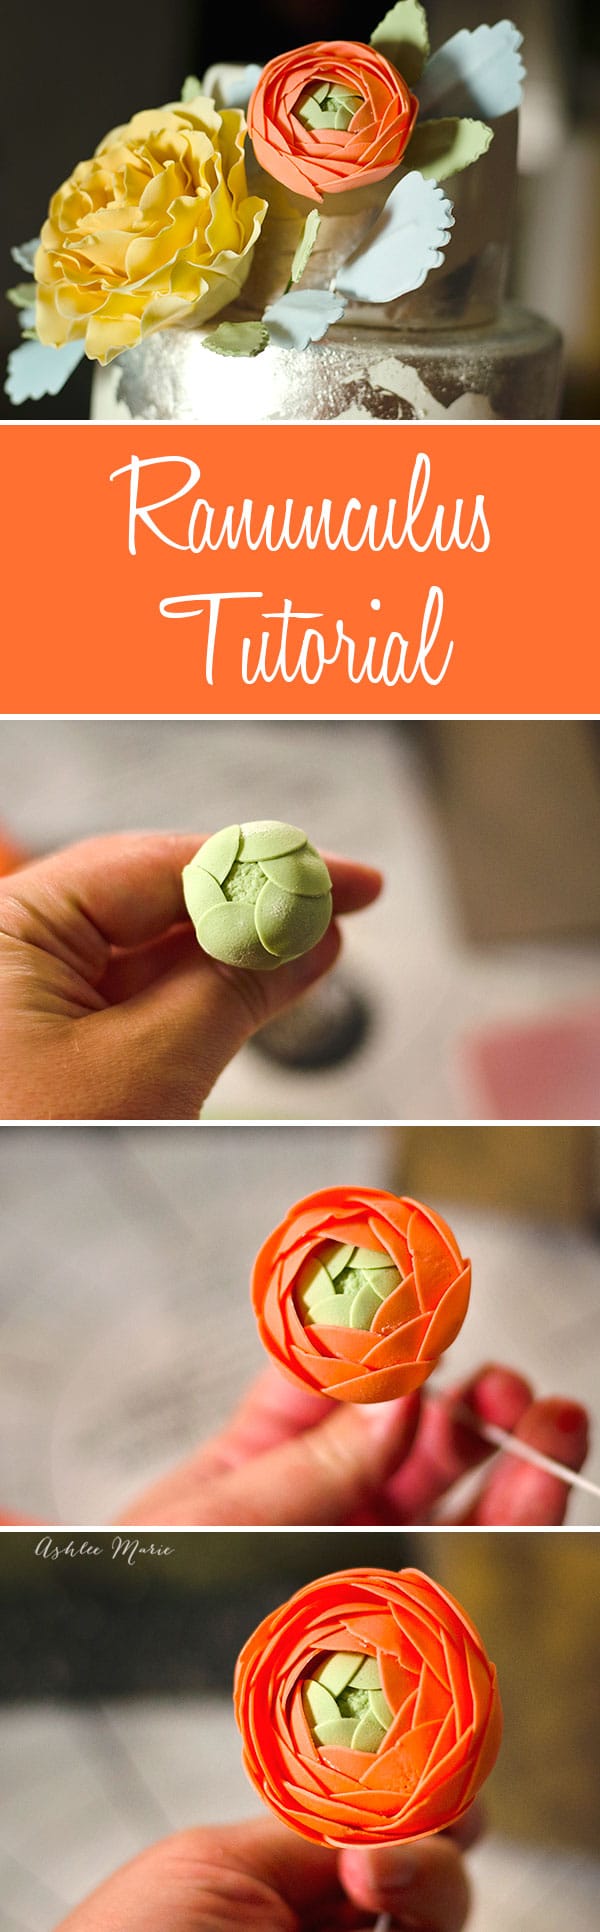 A tutorial for creating your own gumpaste ranunculus to decorate your cakes with